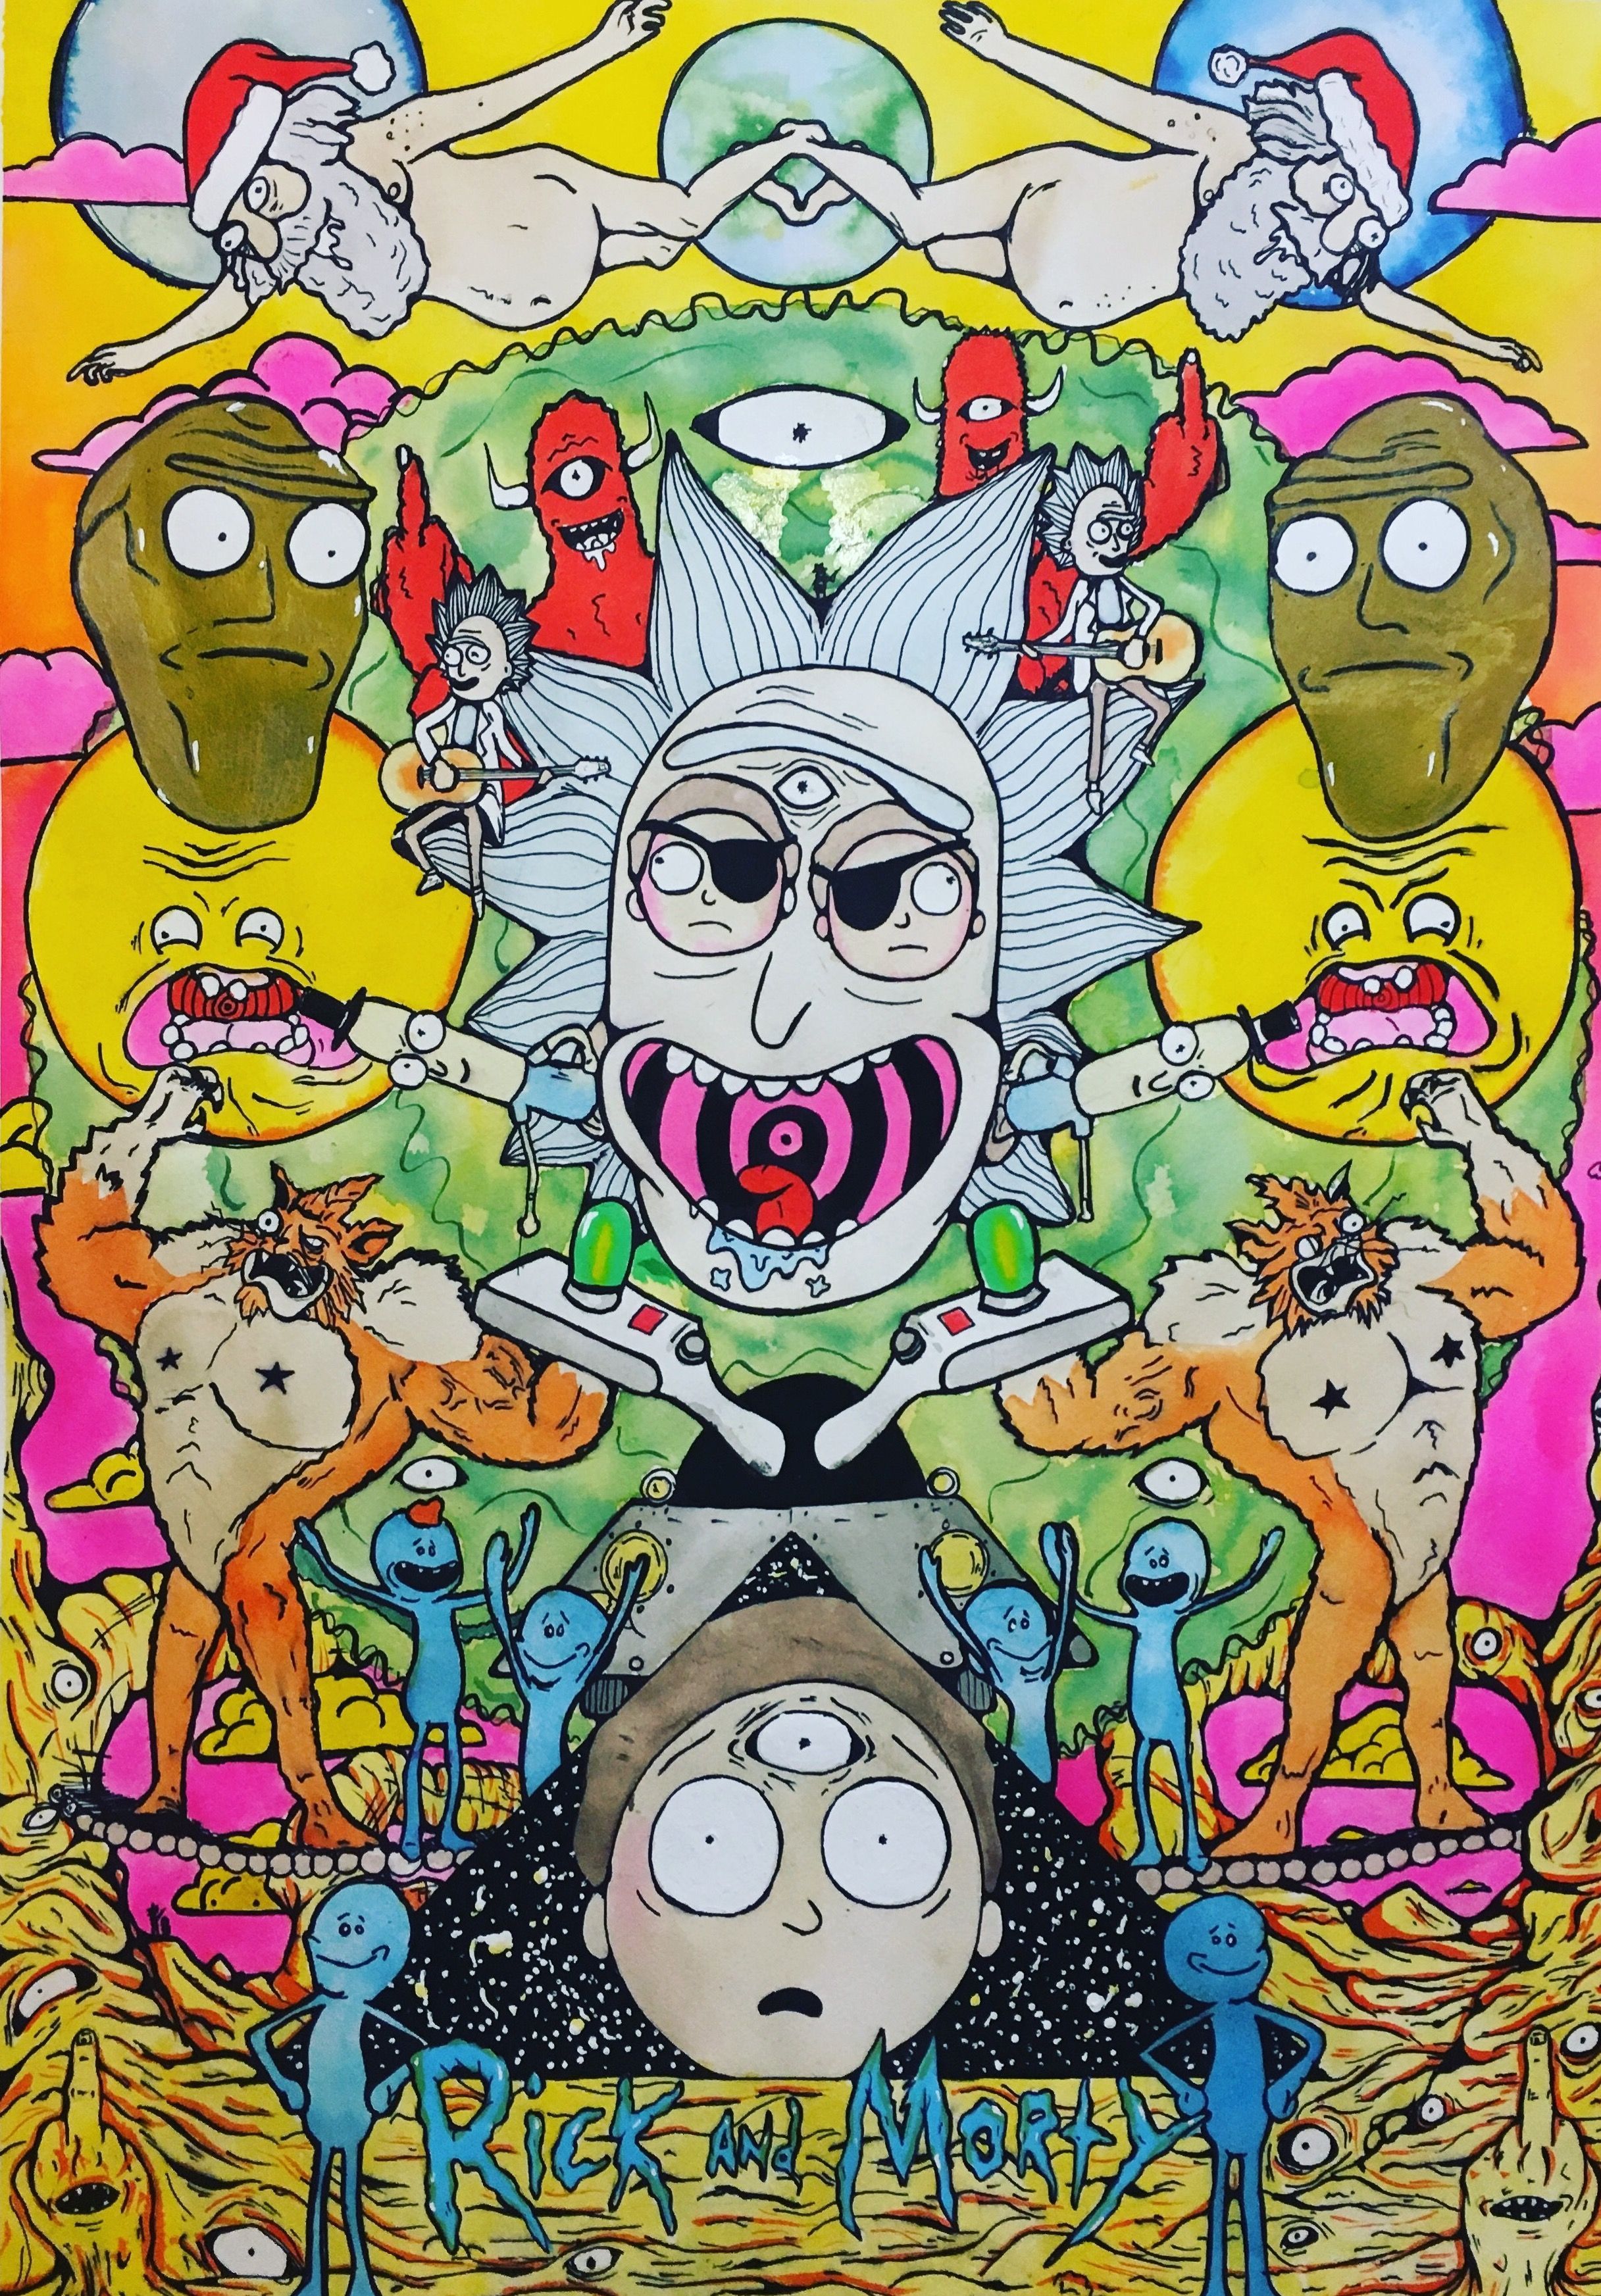 Supreme Rick And Morty Wallpapers  Wallpaper Cave